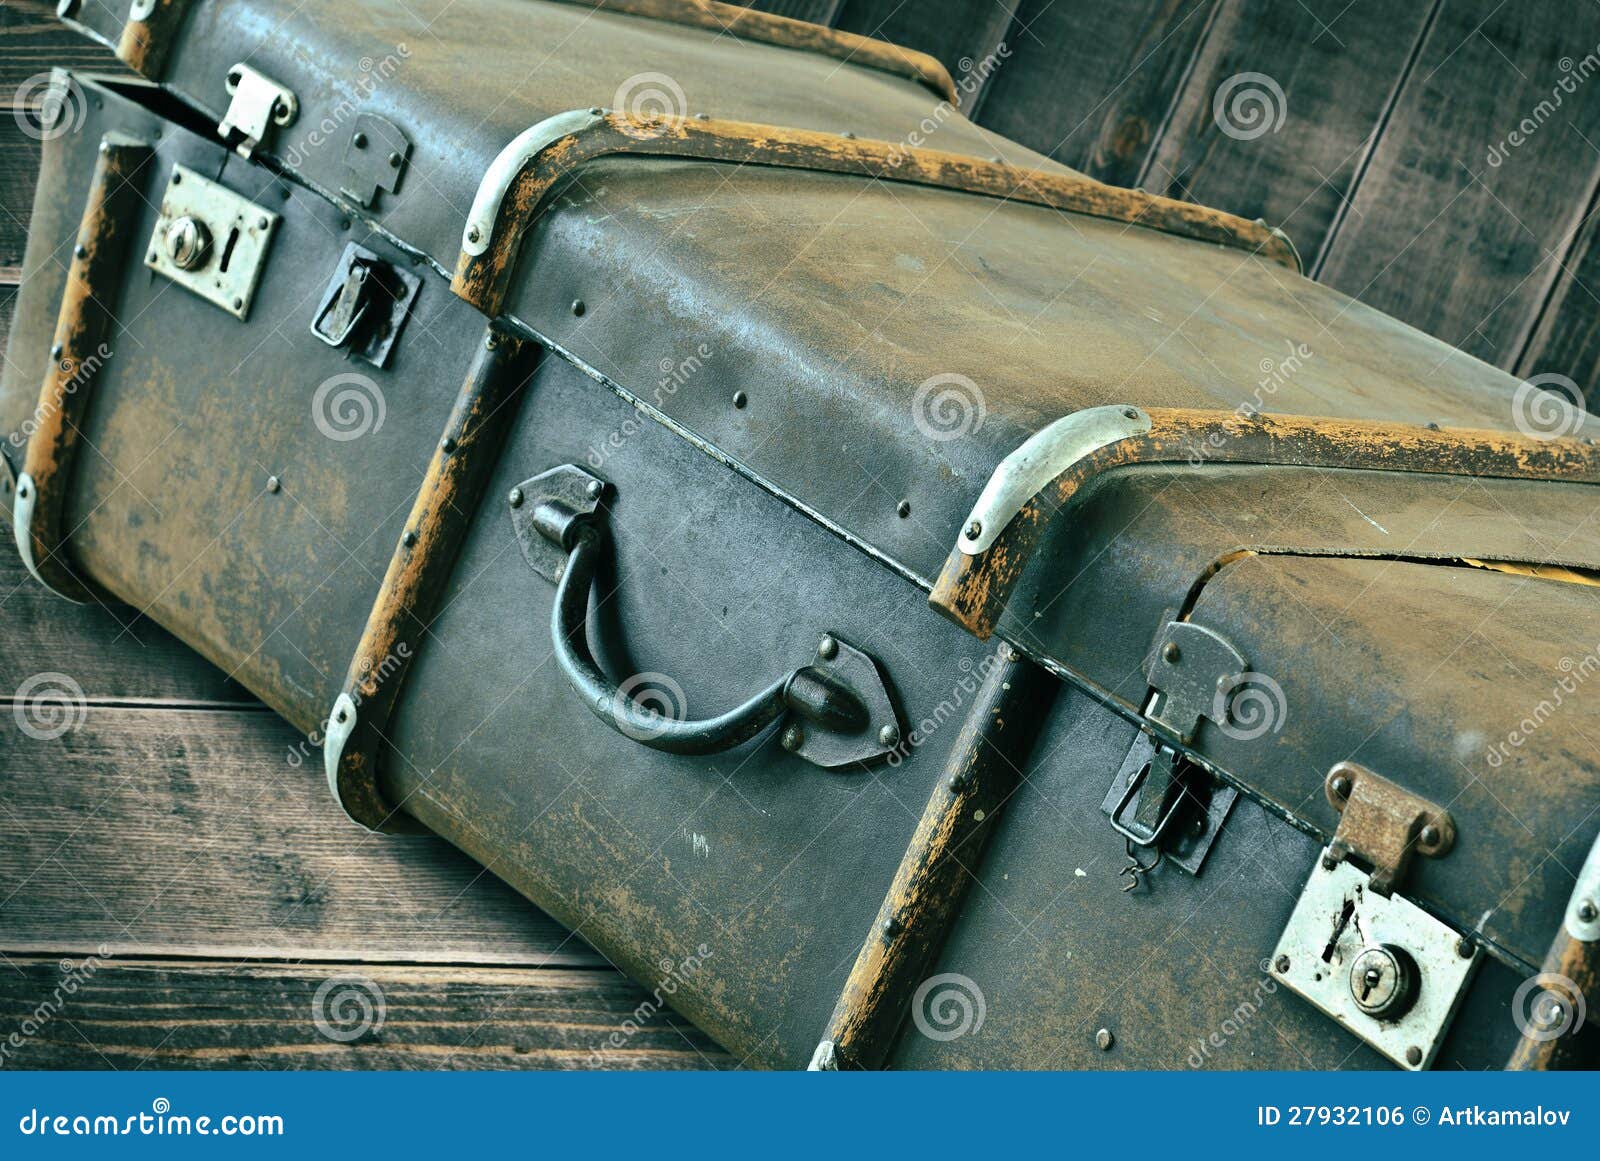 Pile of old vintage suitcases colorful briefcases Vector Image